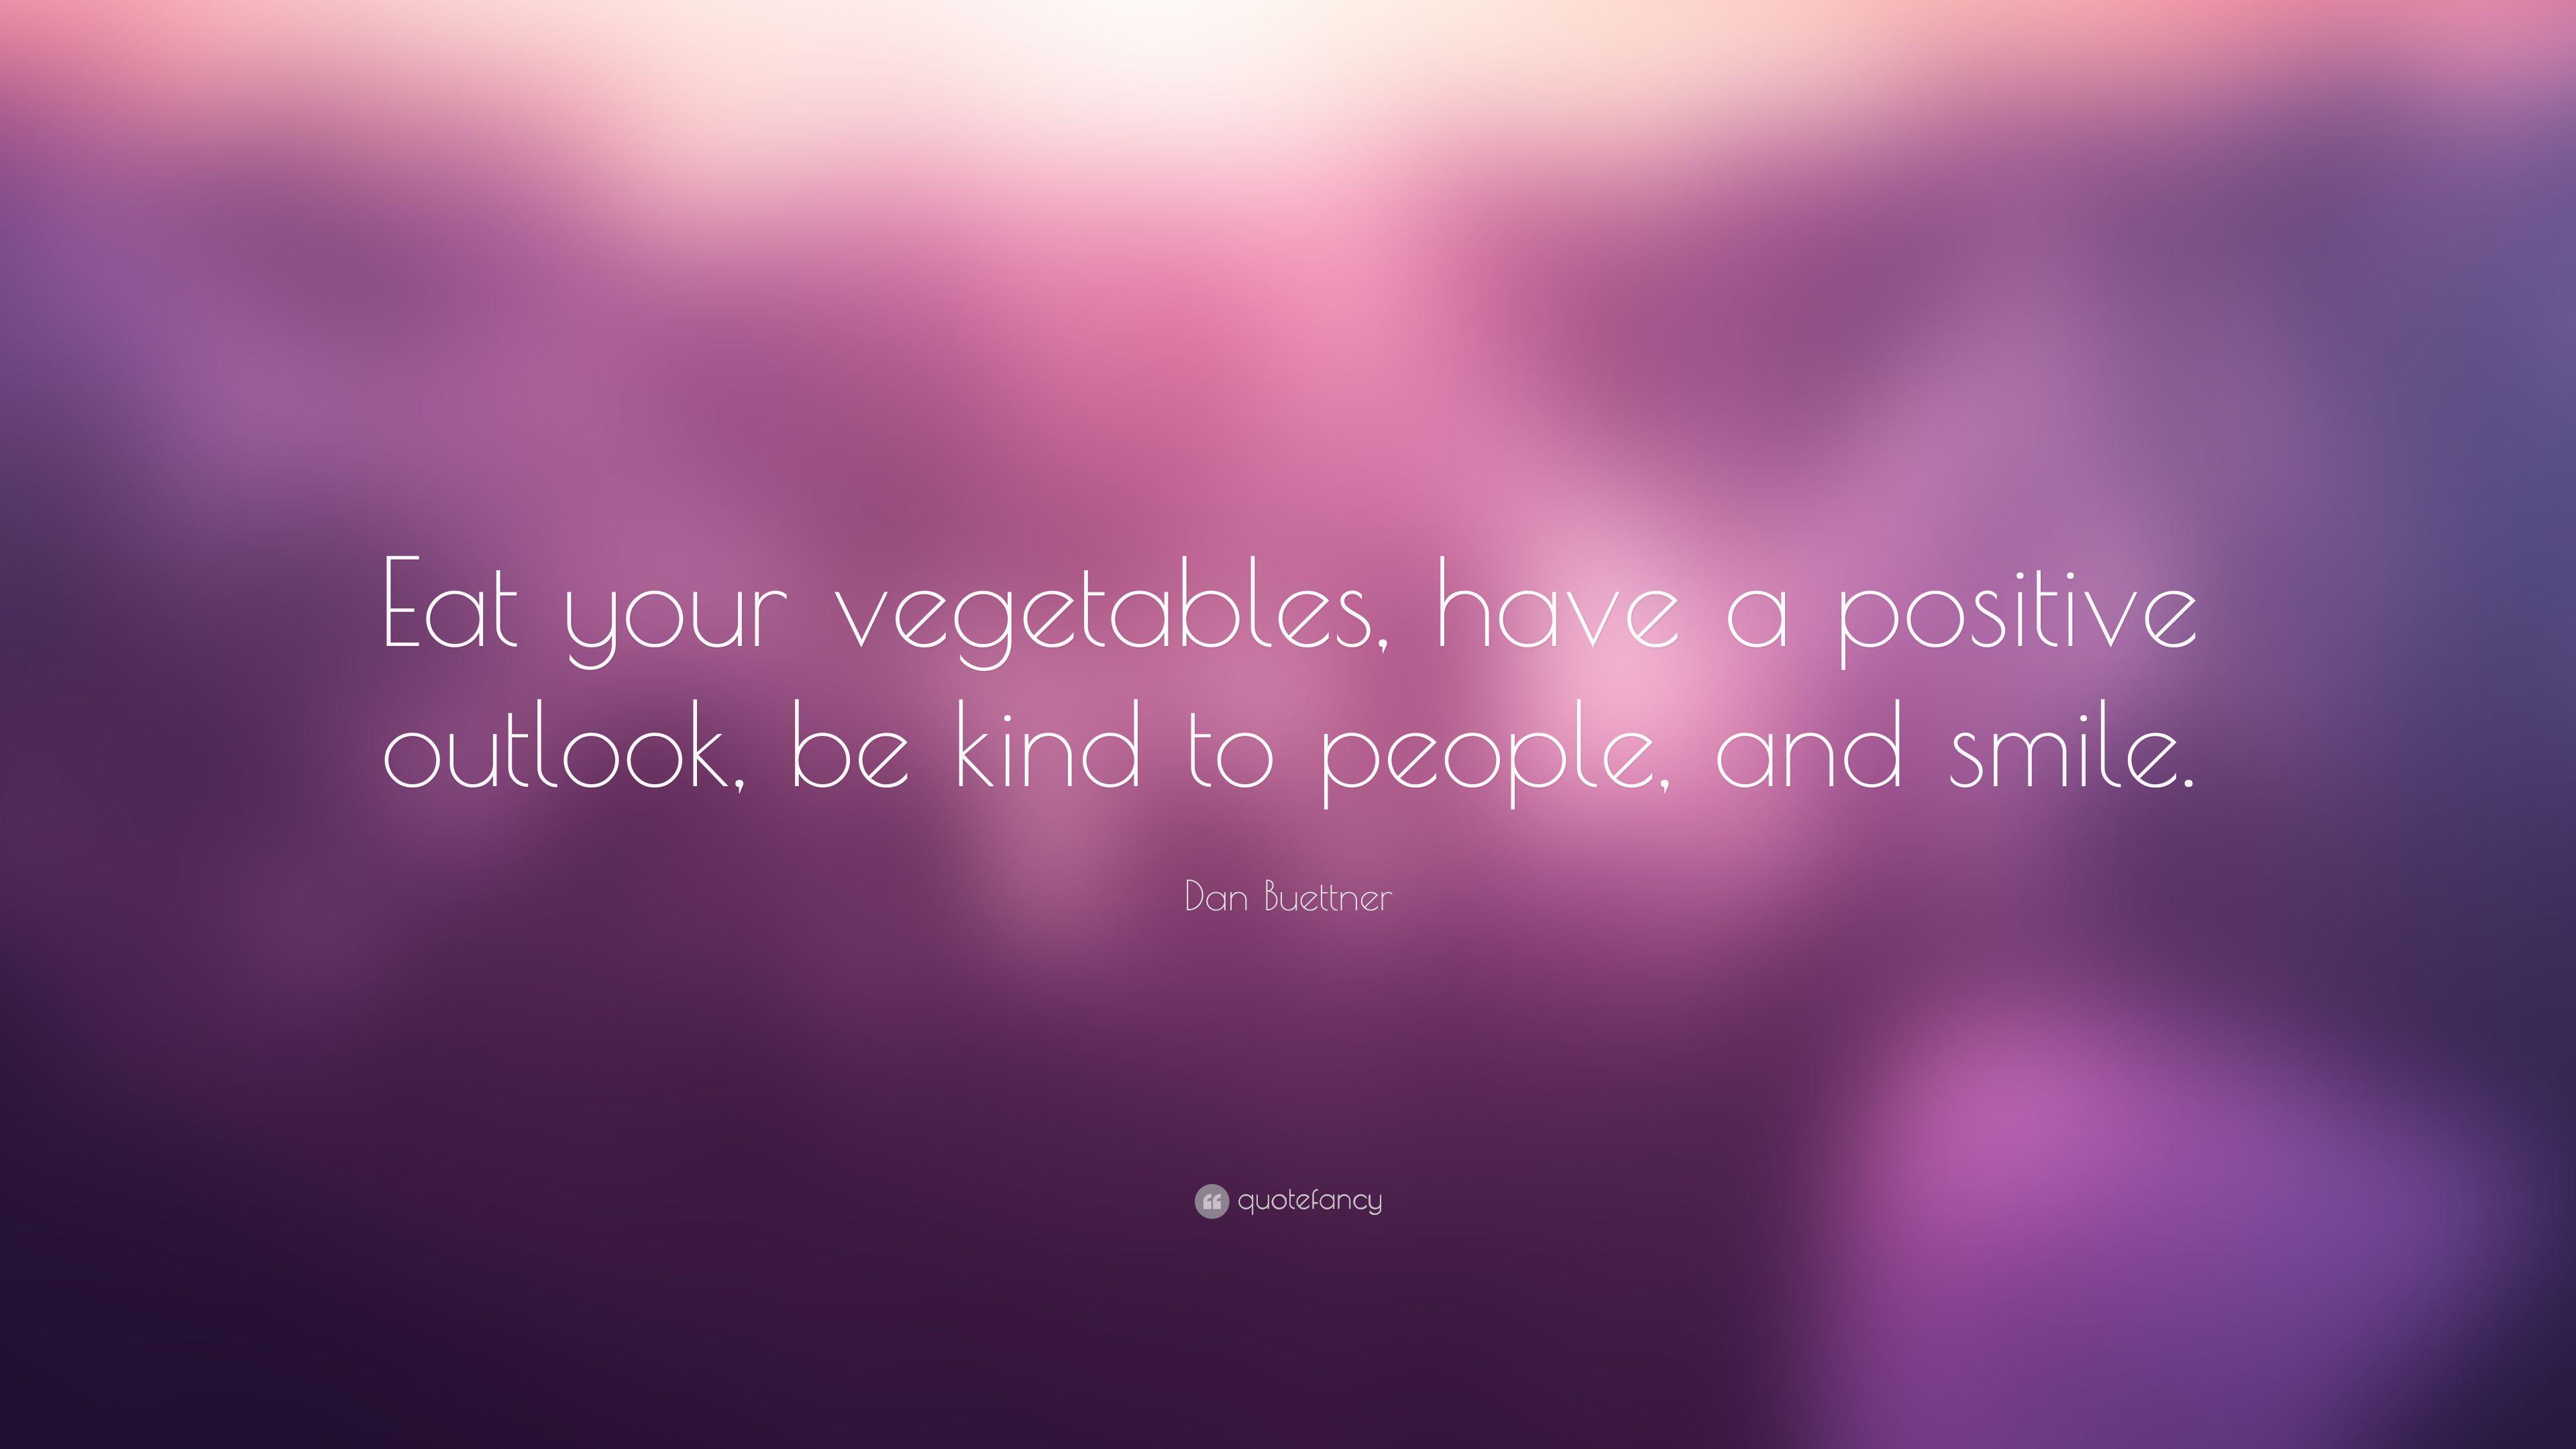 Dan Buettner Quote: “Eat your vegetables, have a positive outlook